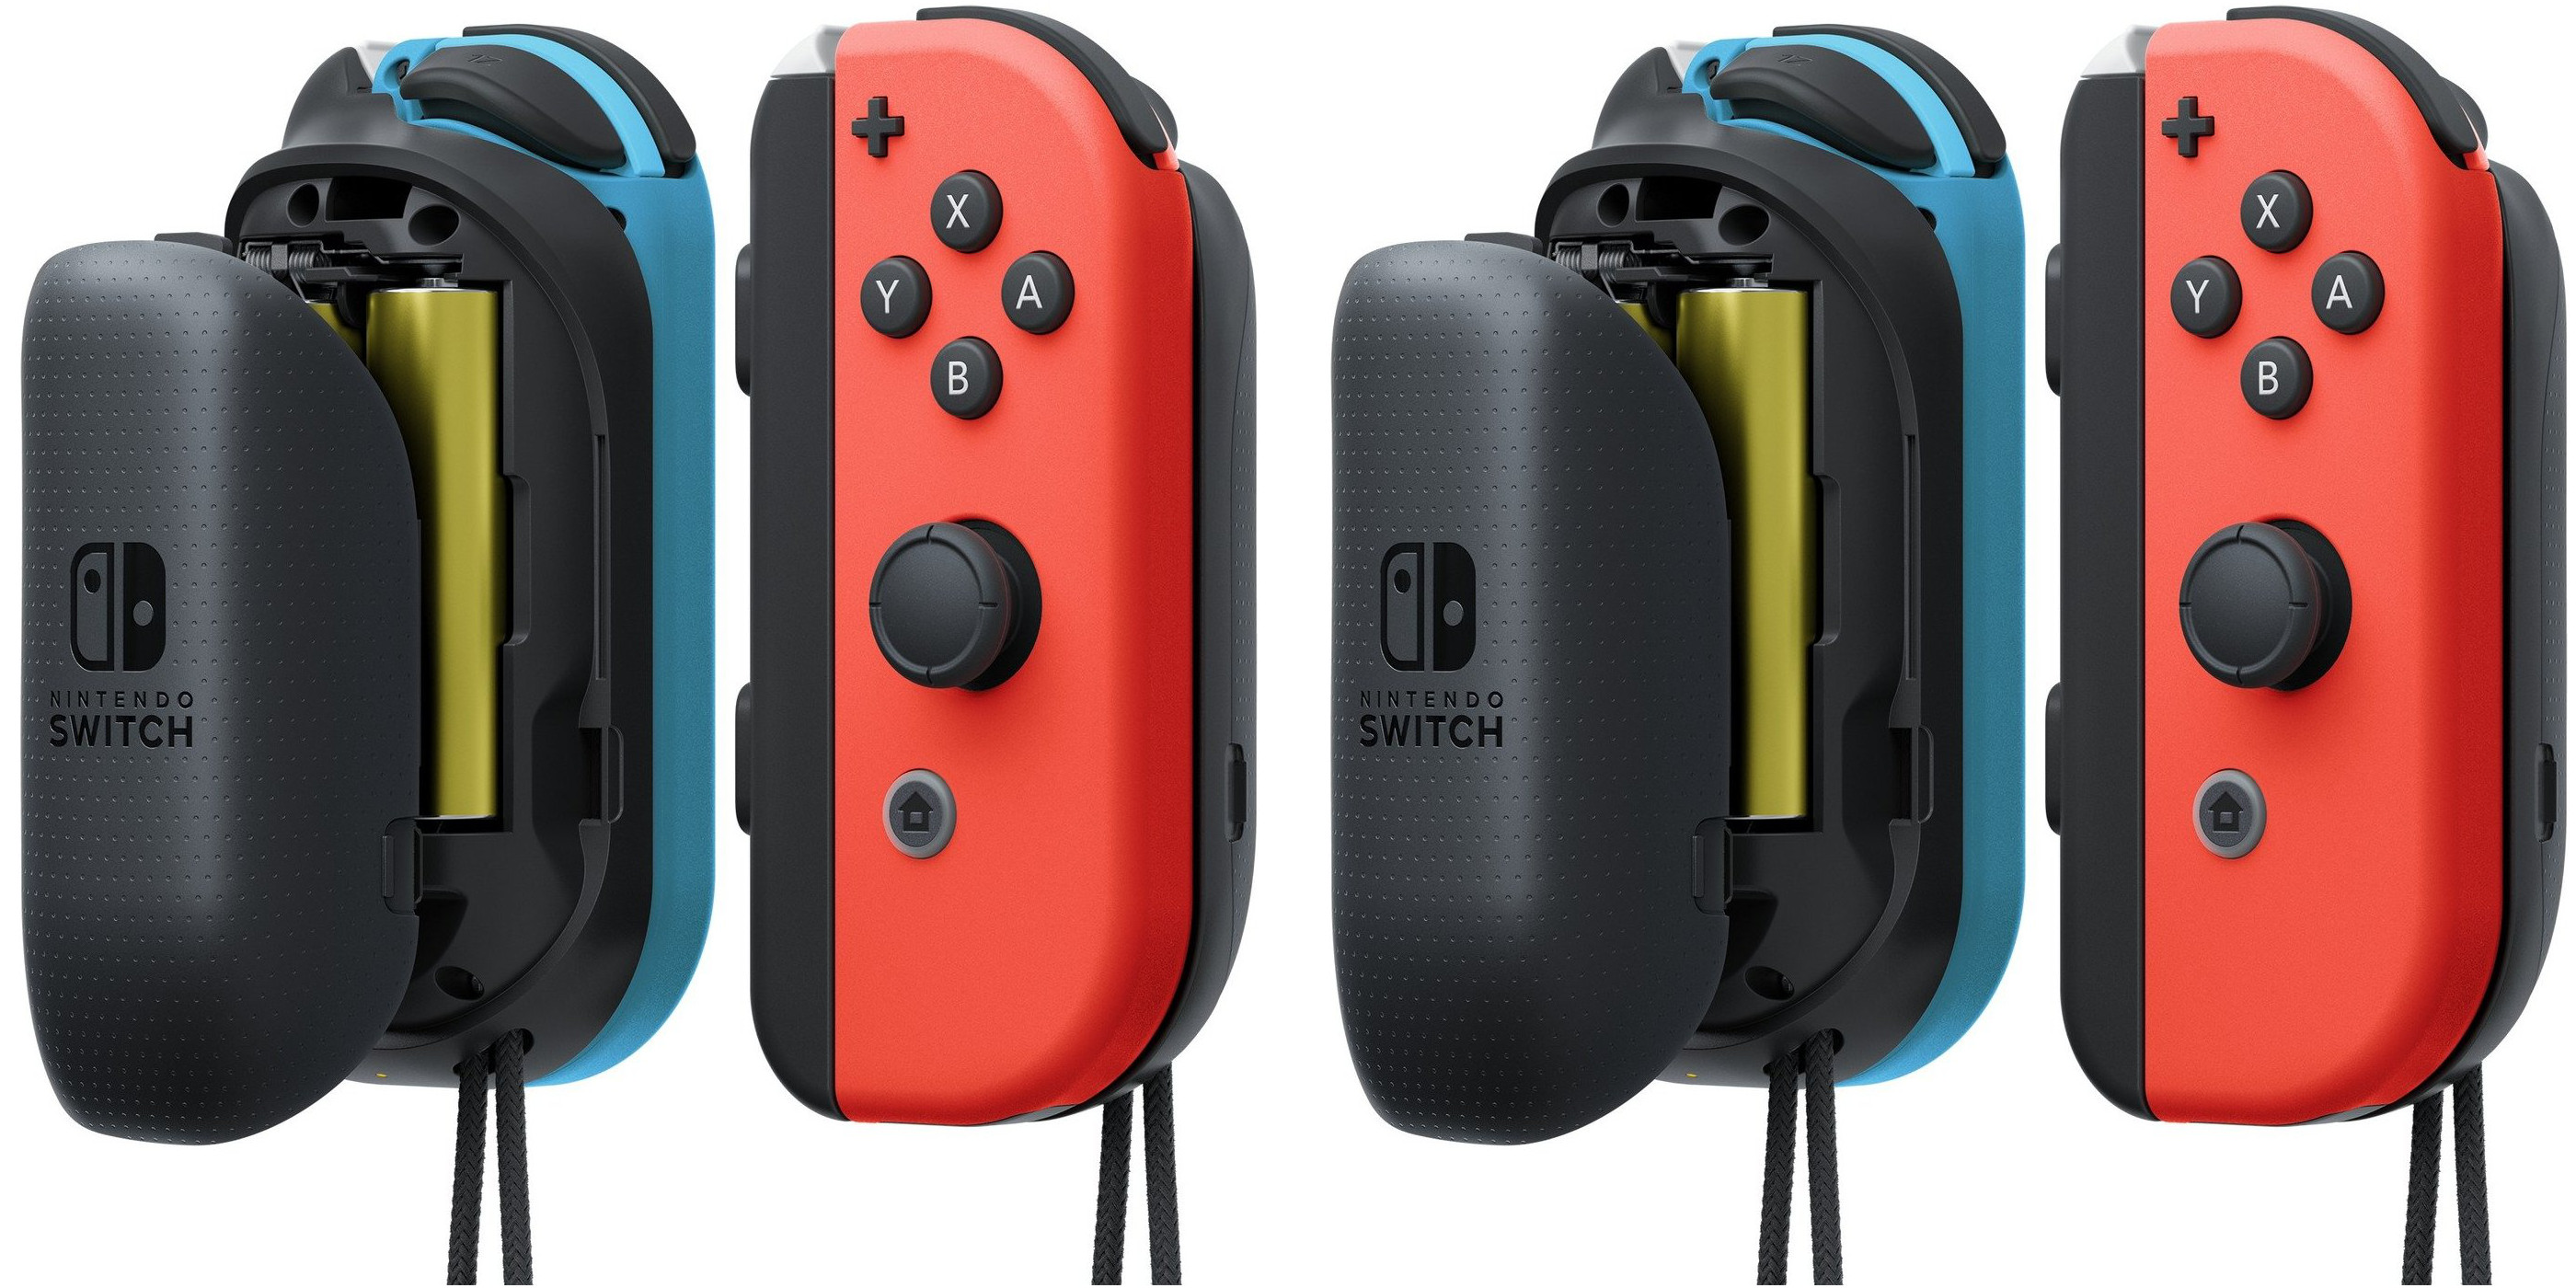 Nintendo S Switch Joy Con Aa Battery Pack Is Now On Sale For 10